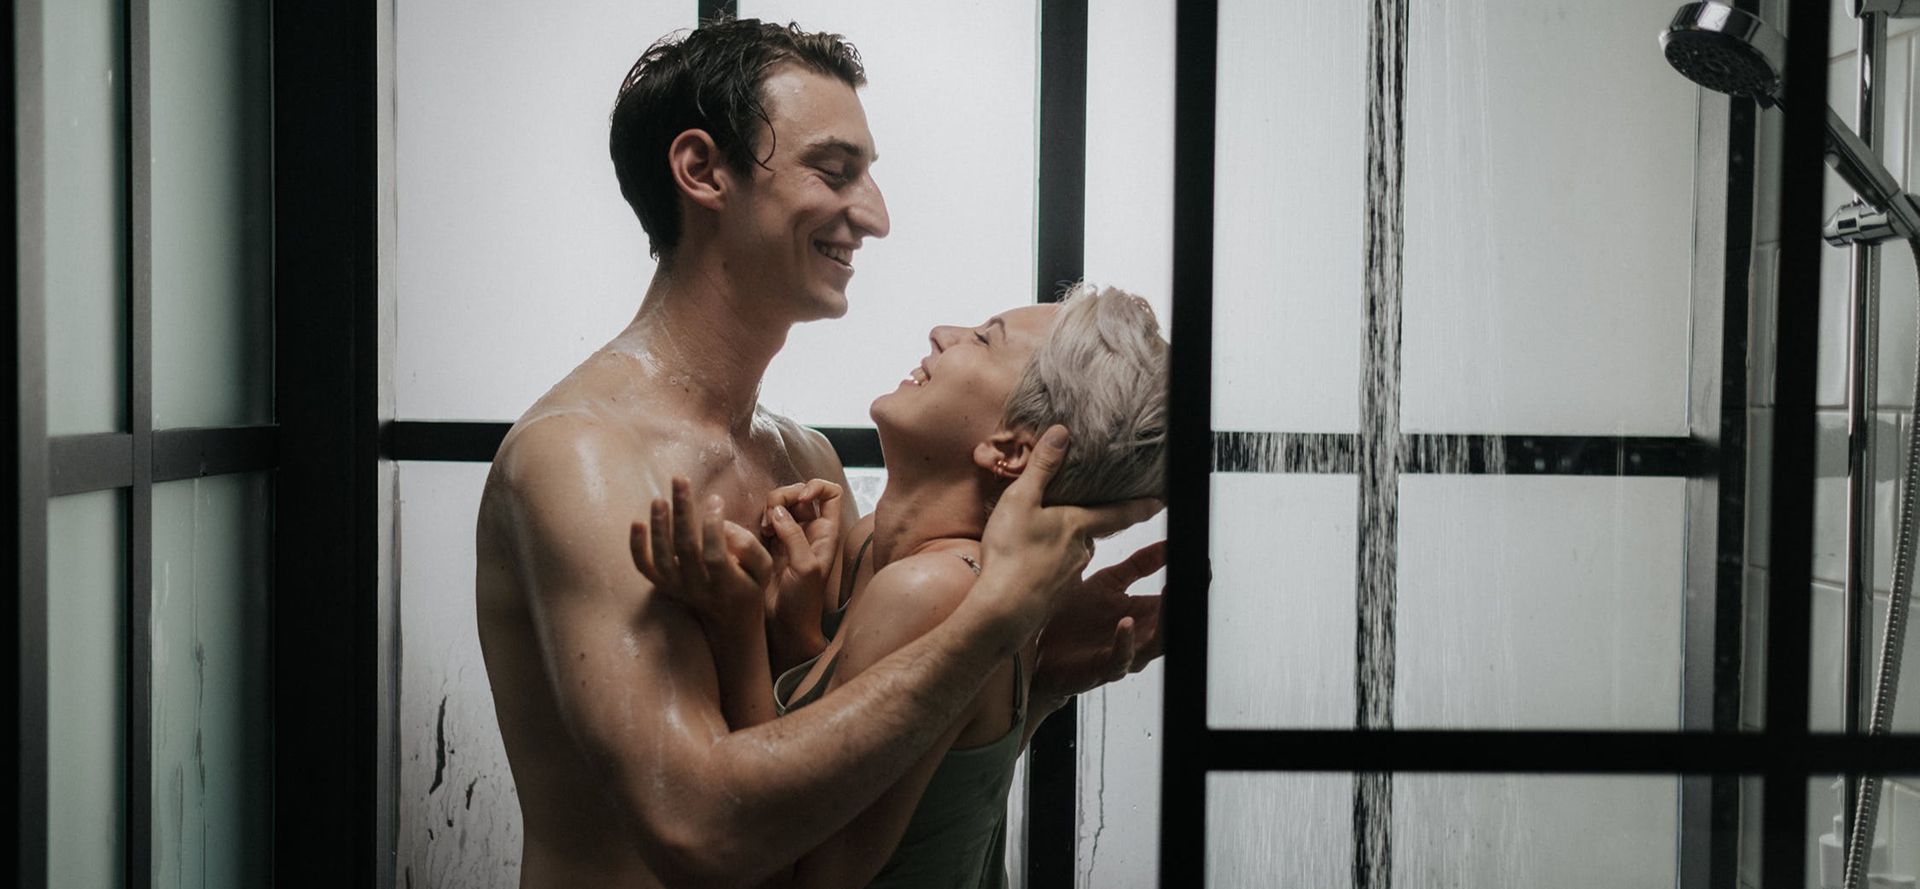 Taurus man with woman in shower.